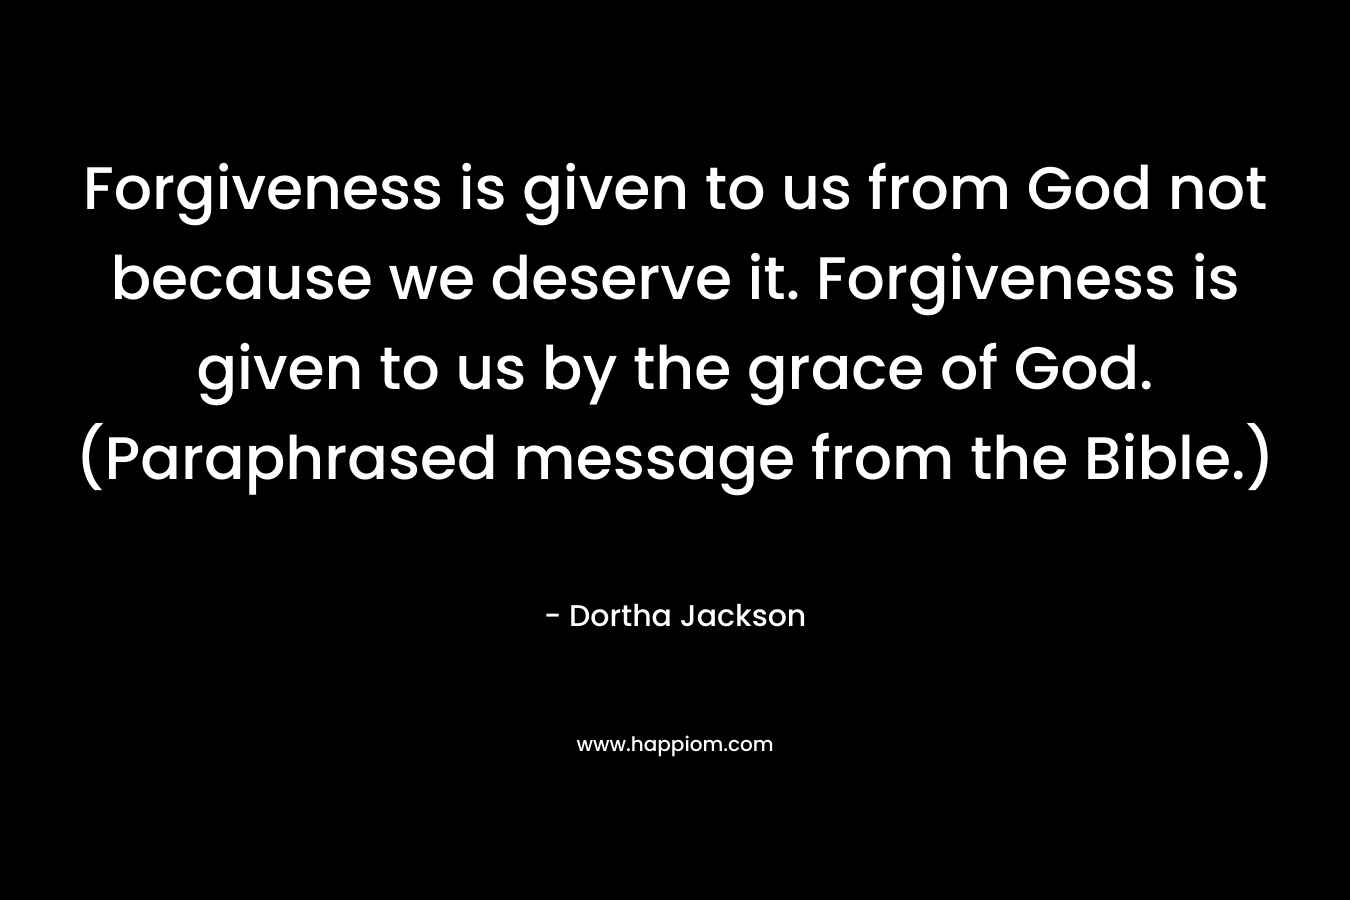 Forgiveness is given to us from God not because we deserve it. Forgiveness is given to us by the grace of God.(Paraphrased message from the Bible.)